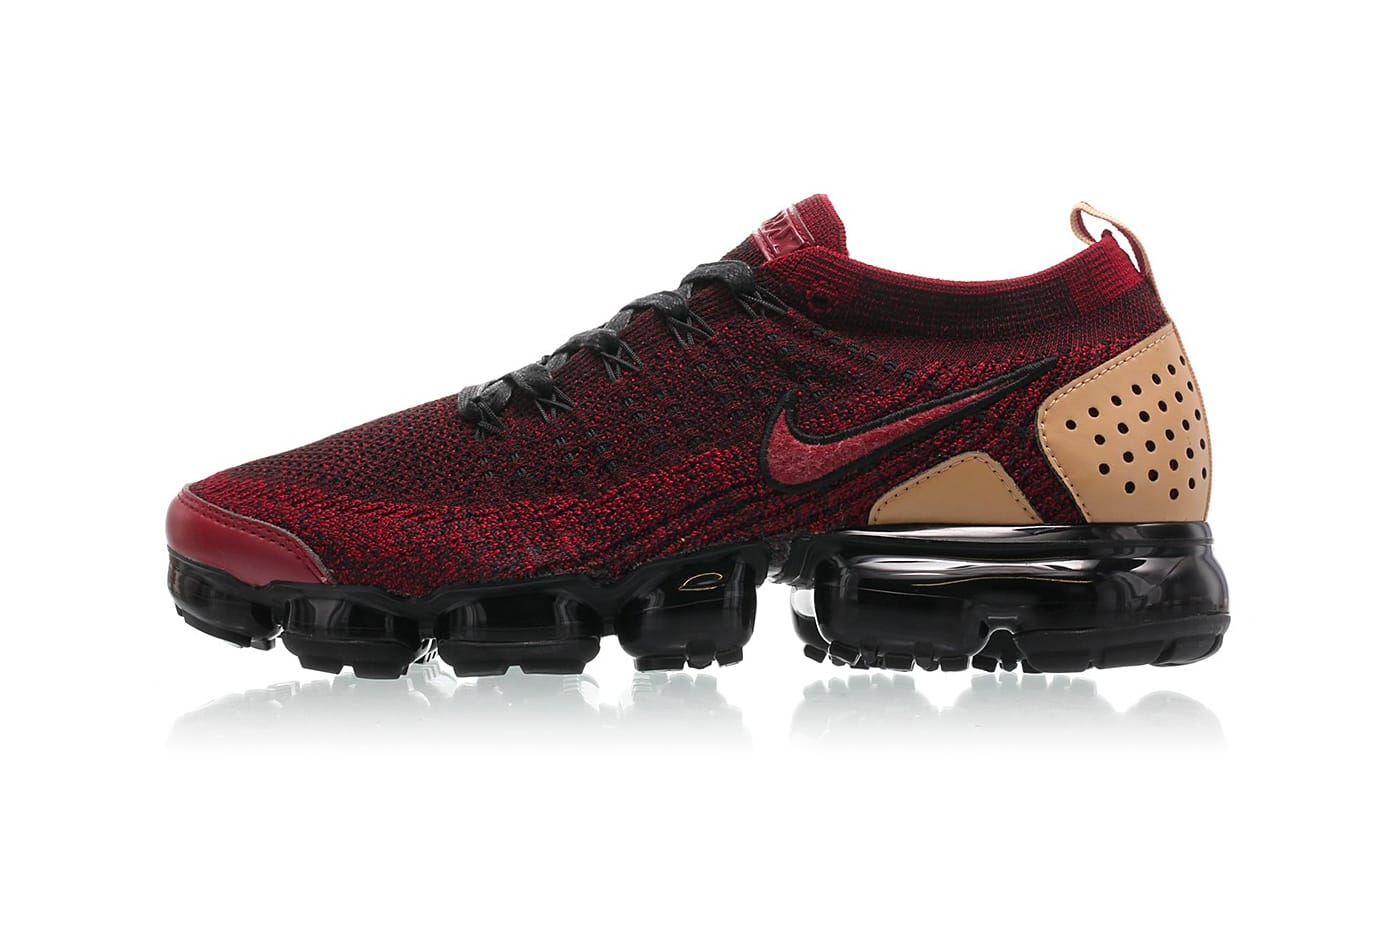 vapormax red and black